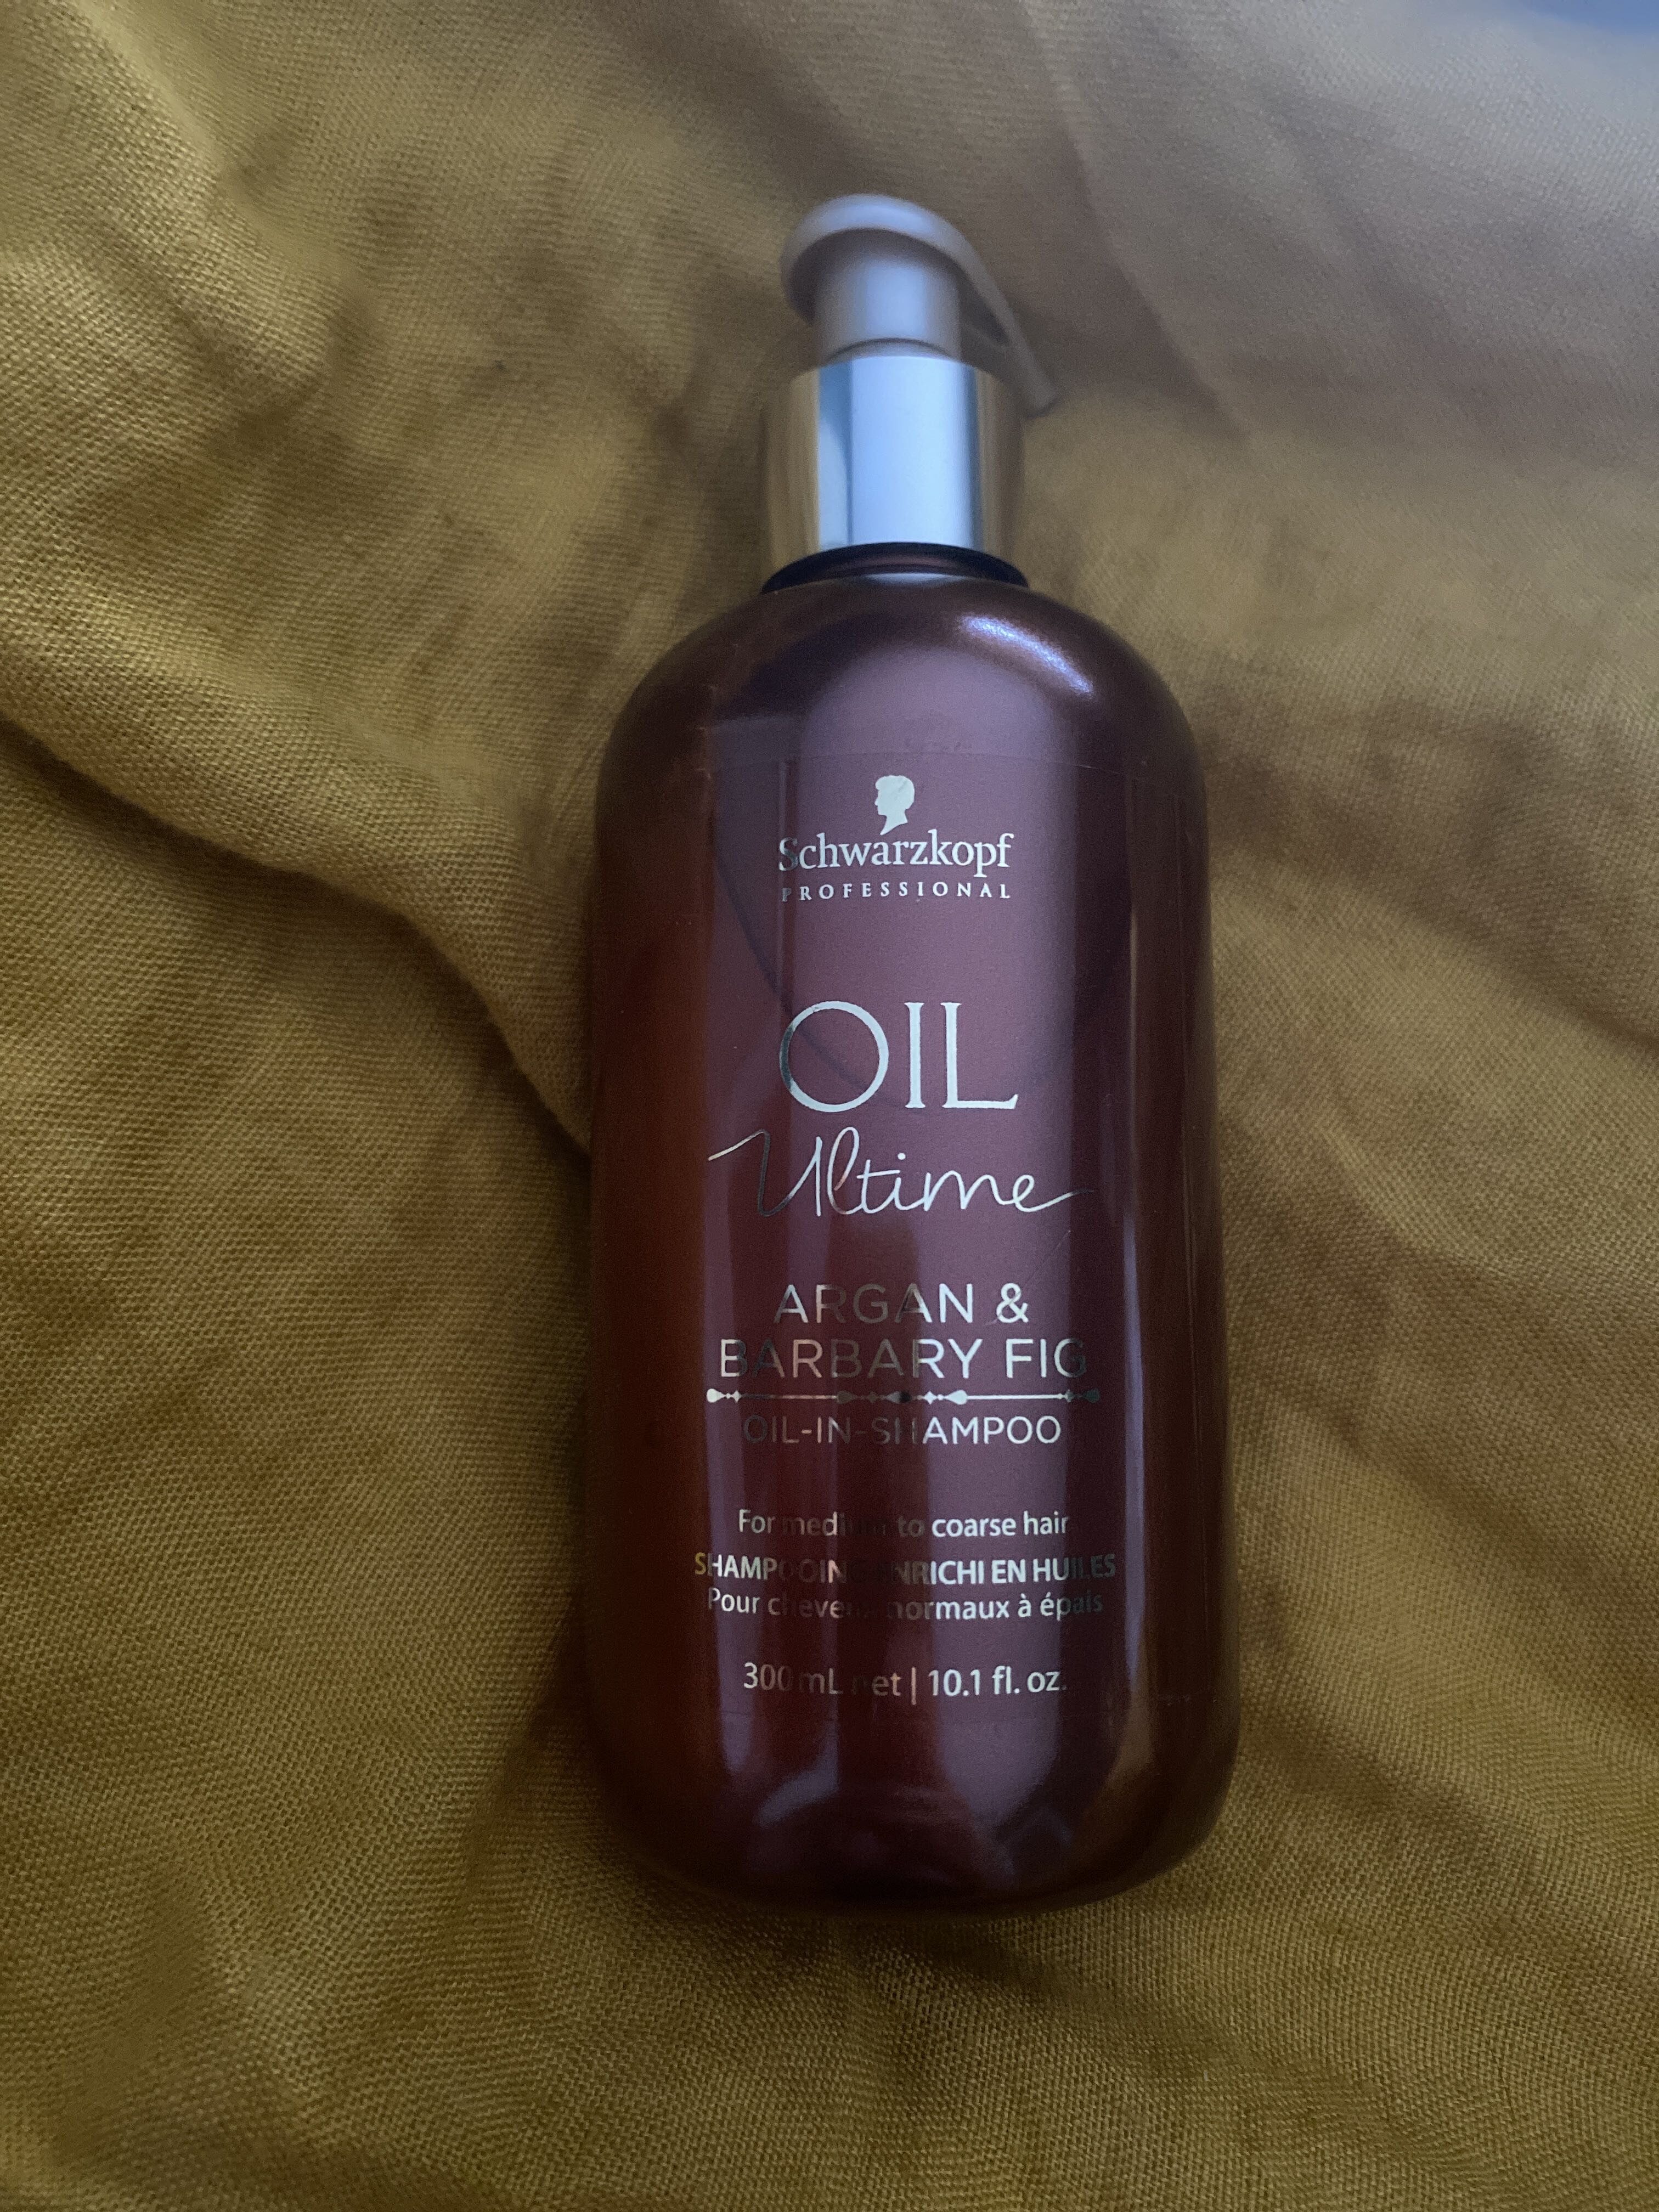 Oil ultime- argan & barbary fig - Product - fr